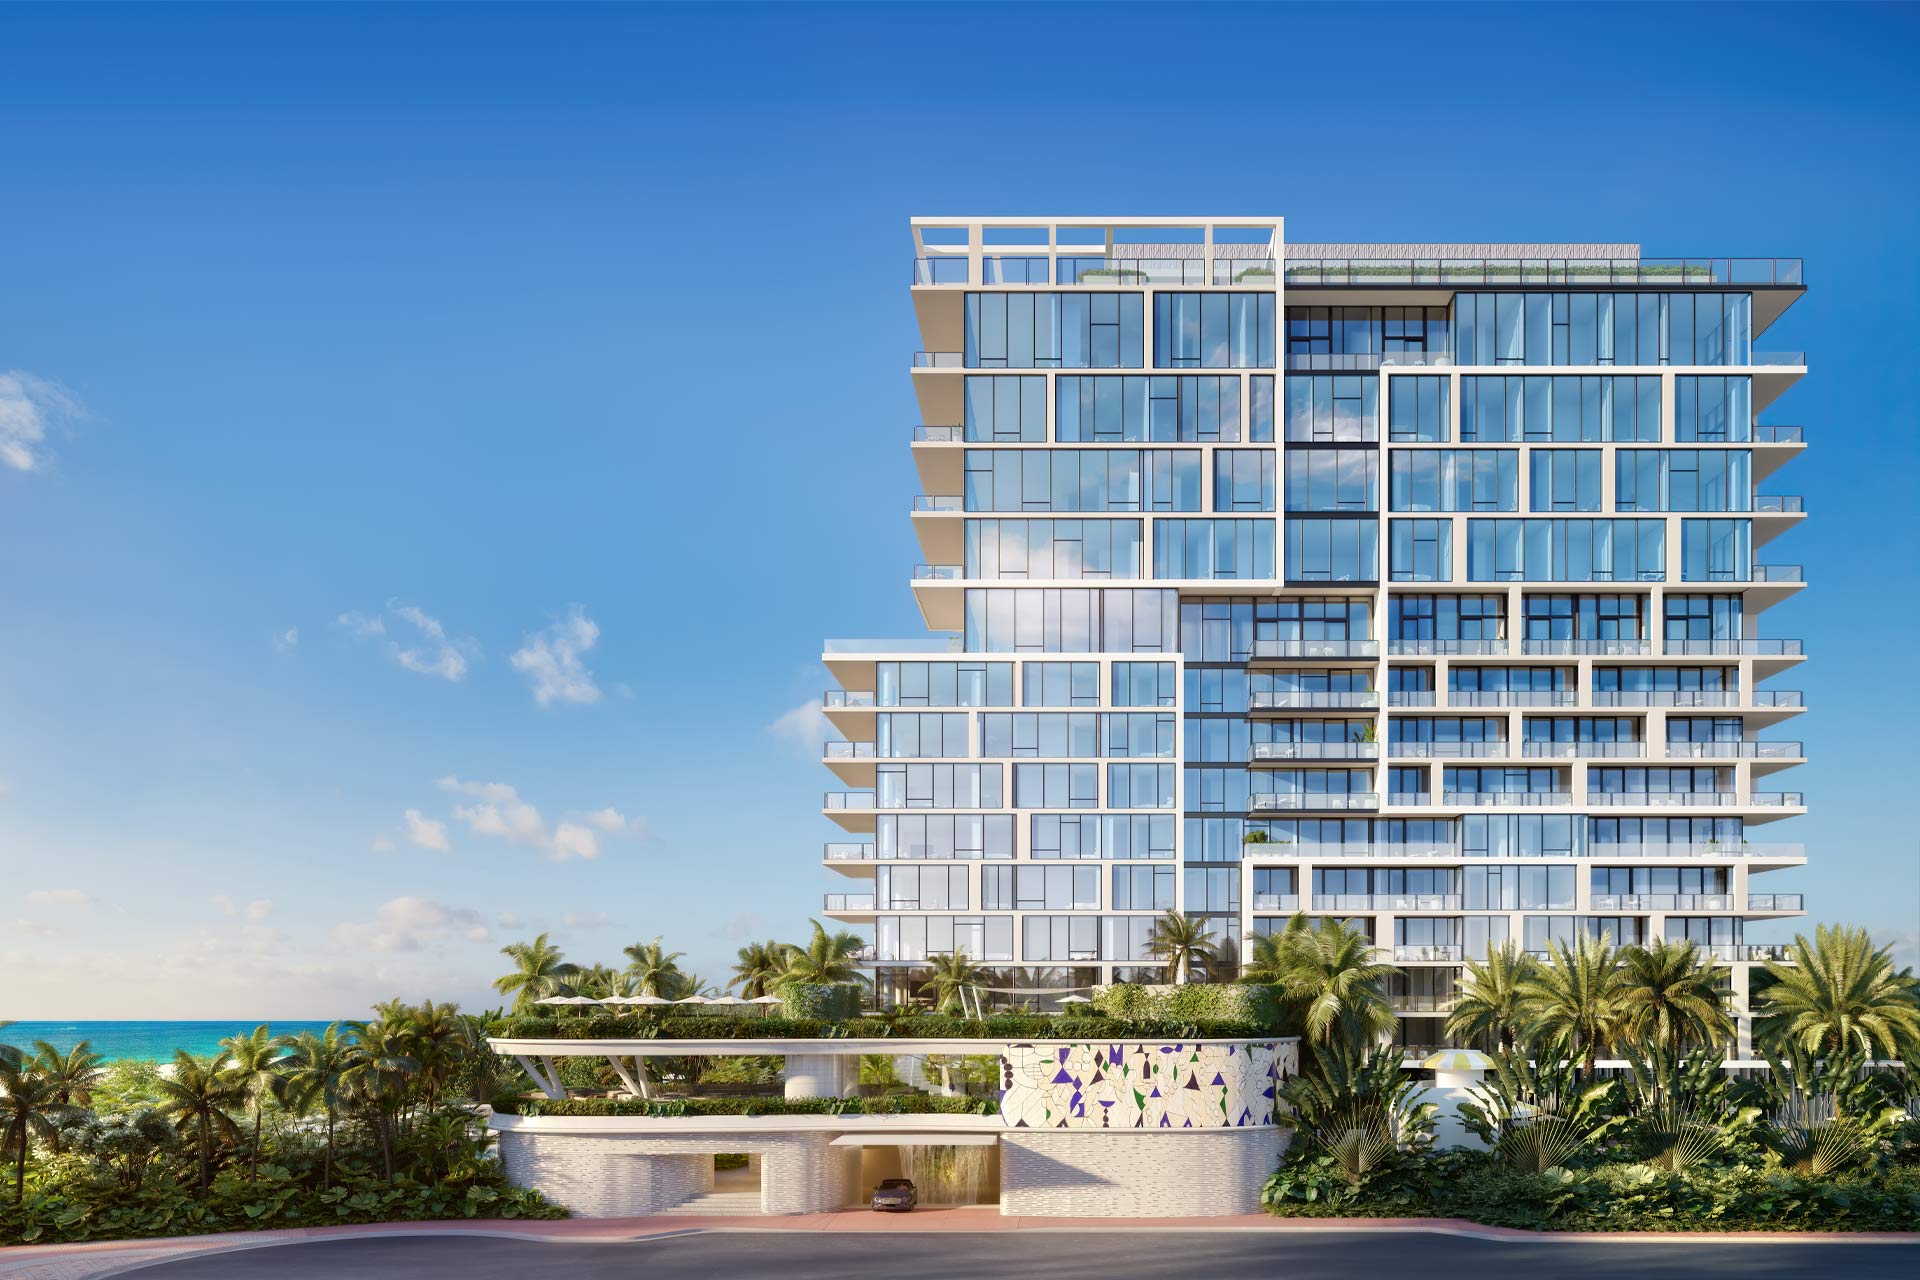 A rendering of The Raleigh, a Rosewood Hotel & Residences in Miami